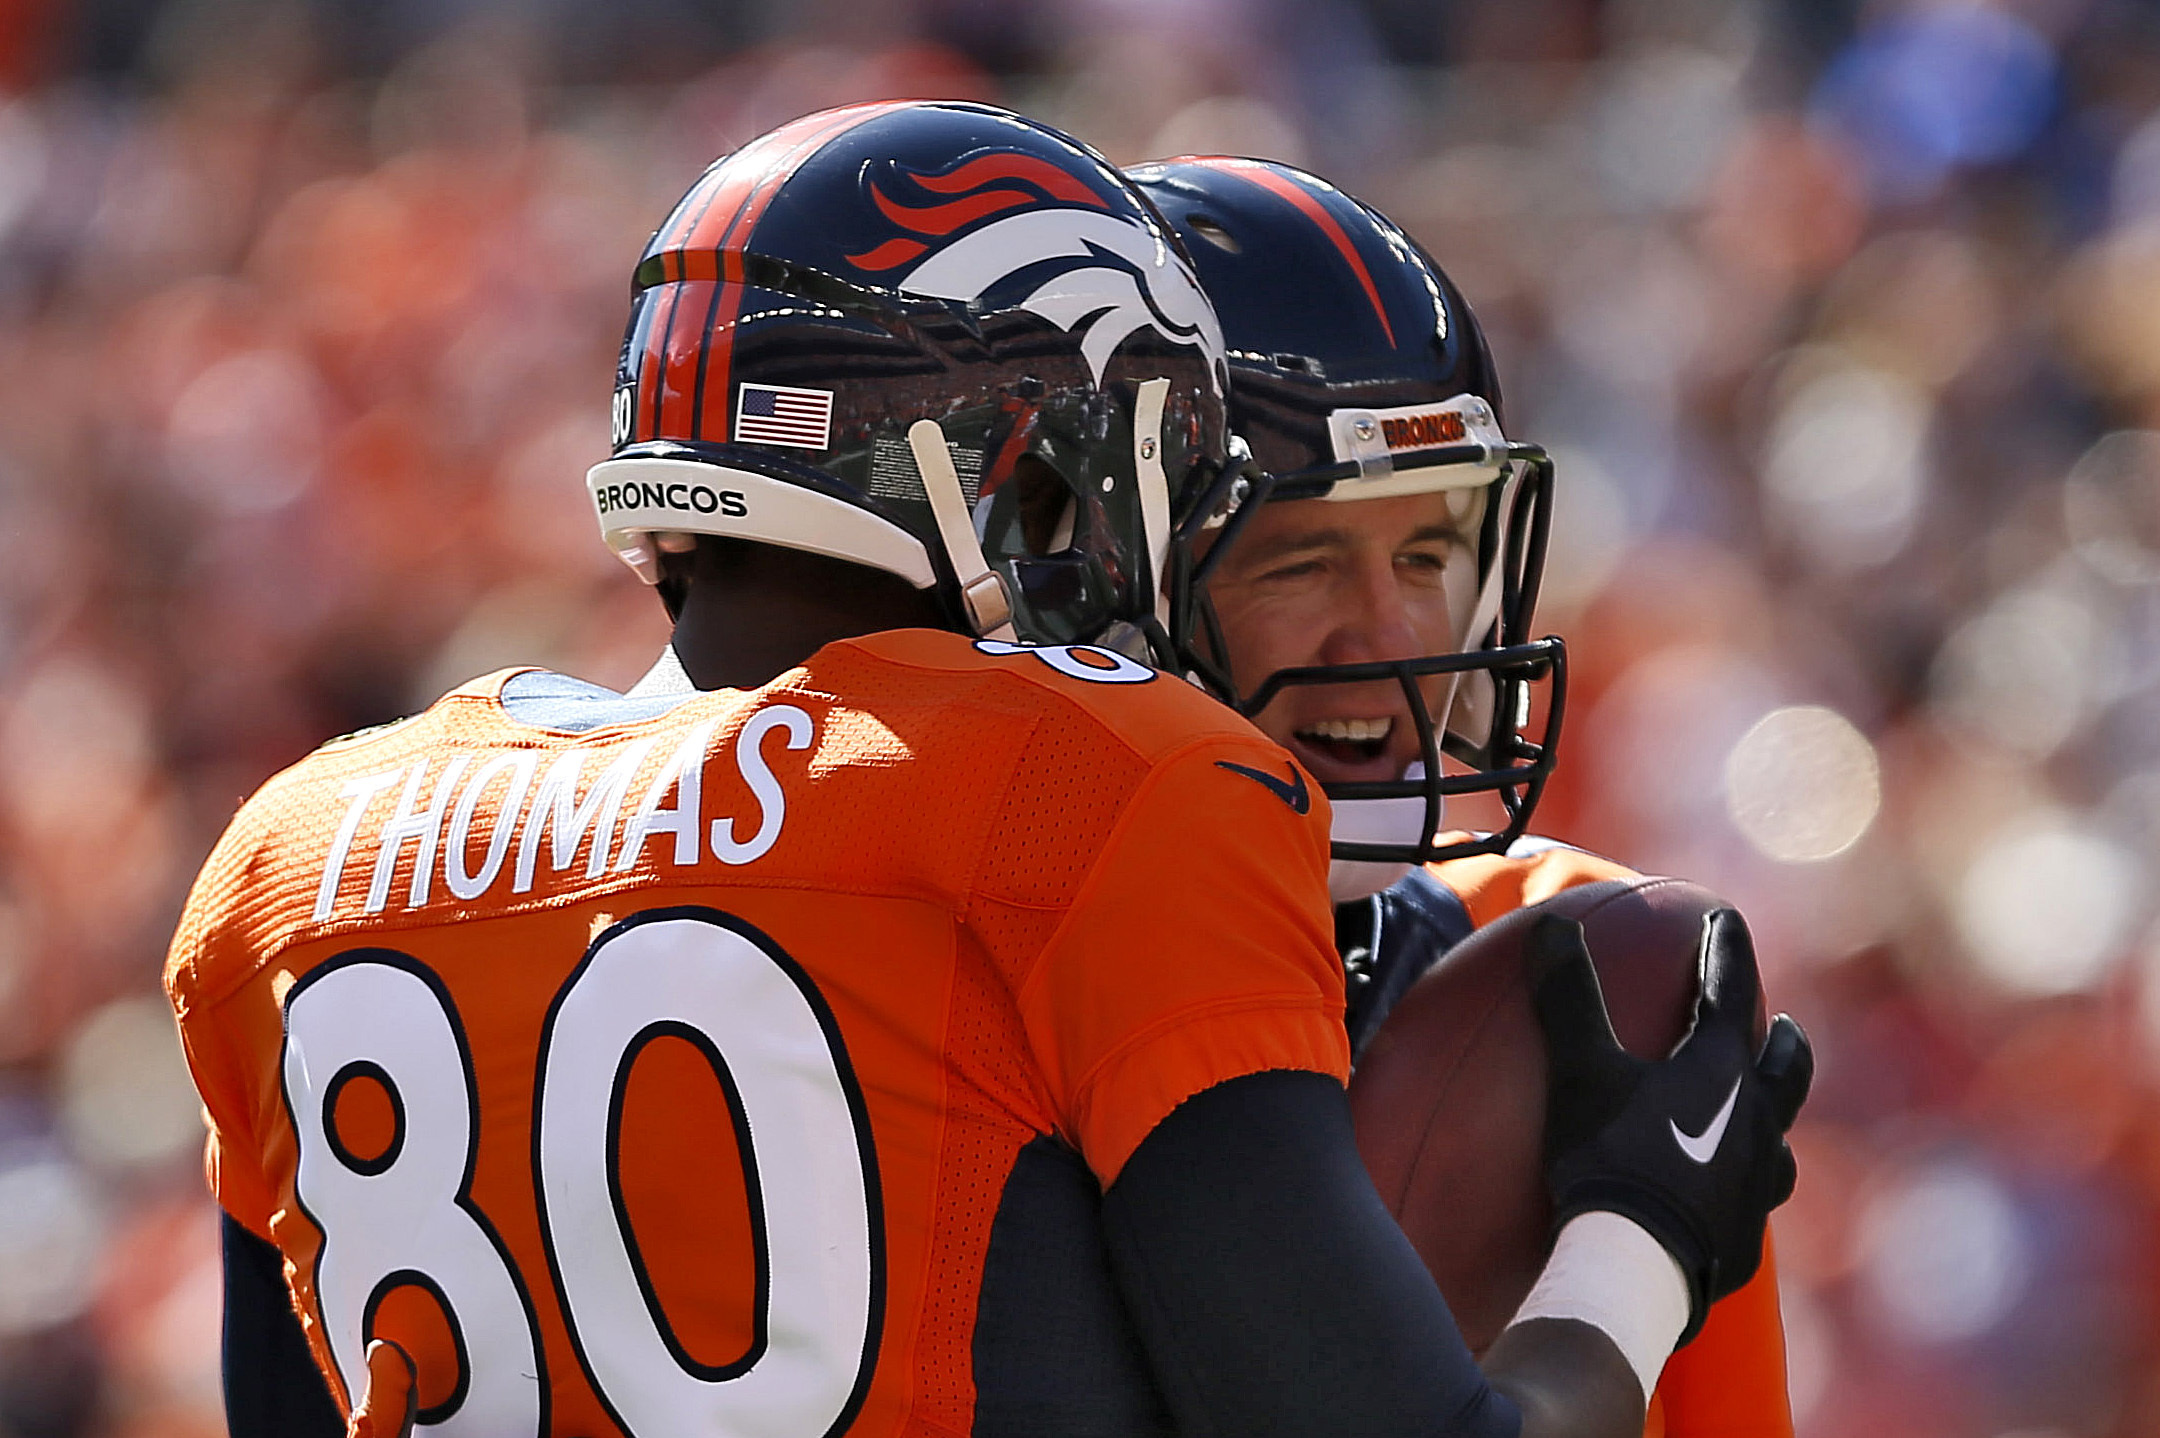 Broncos scouting report: How Denver matches up against Jets and predictions